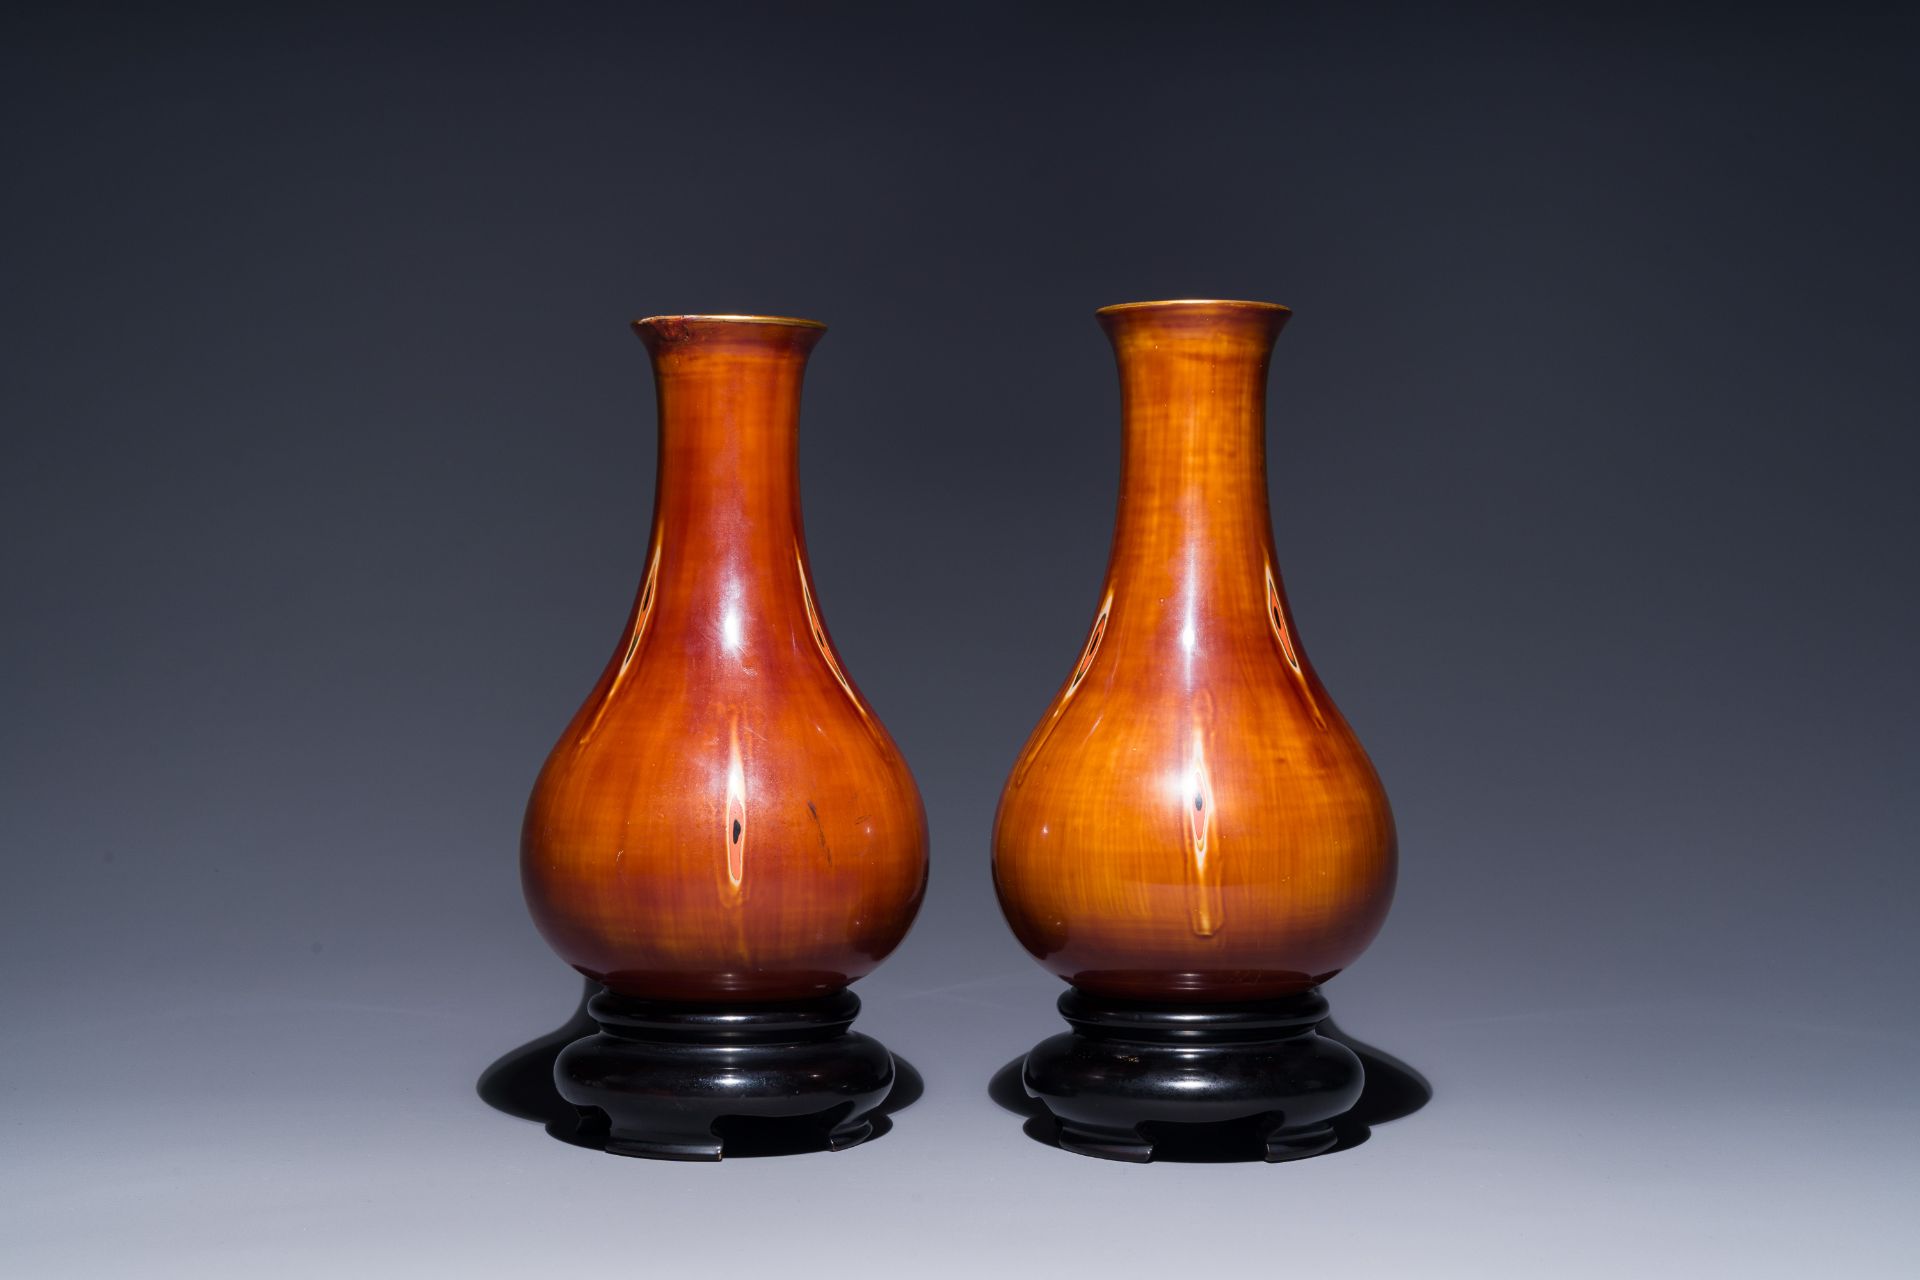 A pair of Chinese Foochow lacquer 'bamboo' vases, 19/20th C.